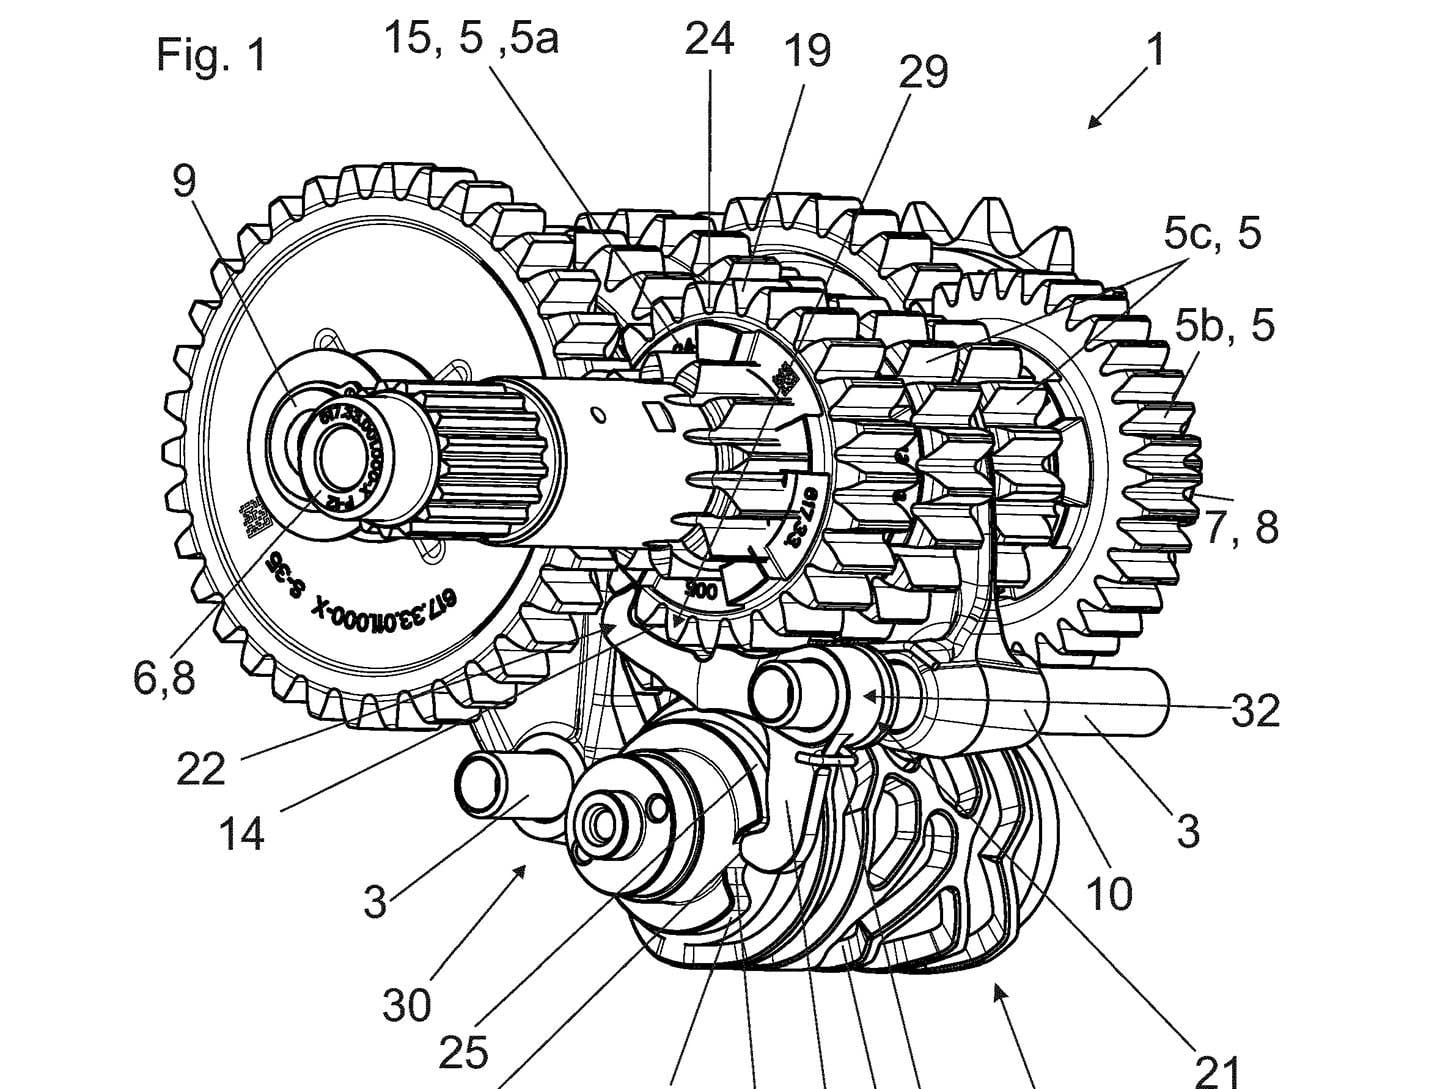 Patent drawings of the KTM’s transmission, which features an interlocking pawl to provide a “park” function.